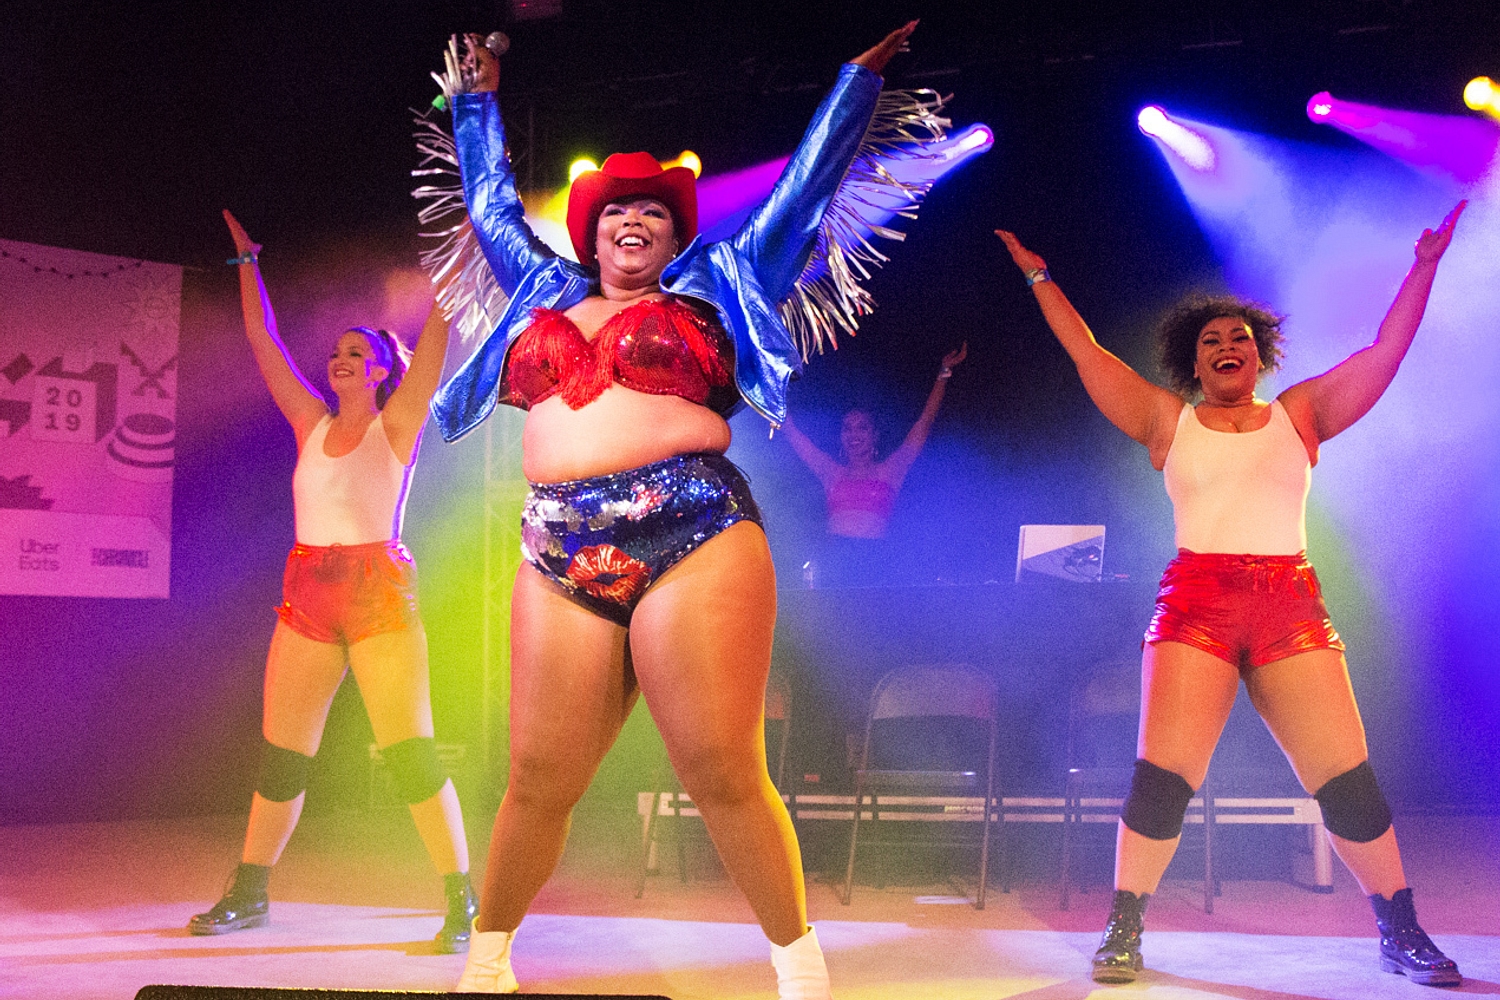 Lizzo, Amyl & the Sniffers, Pottery and more bring SXSW 2019 to a highlight-packed climax